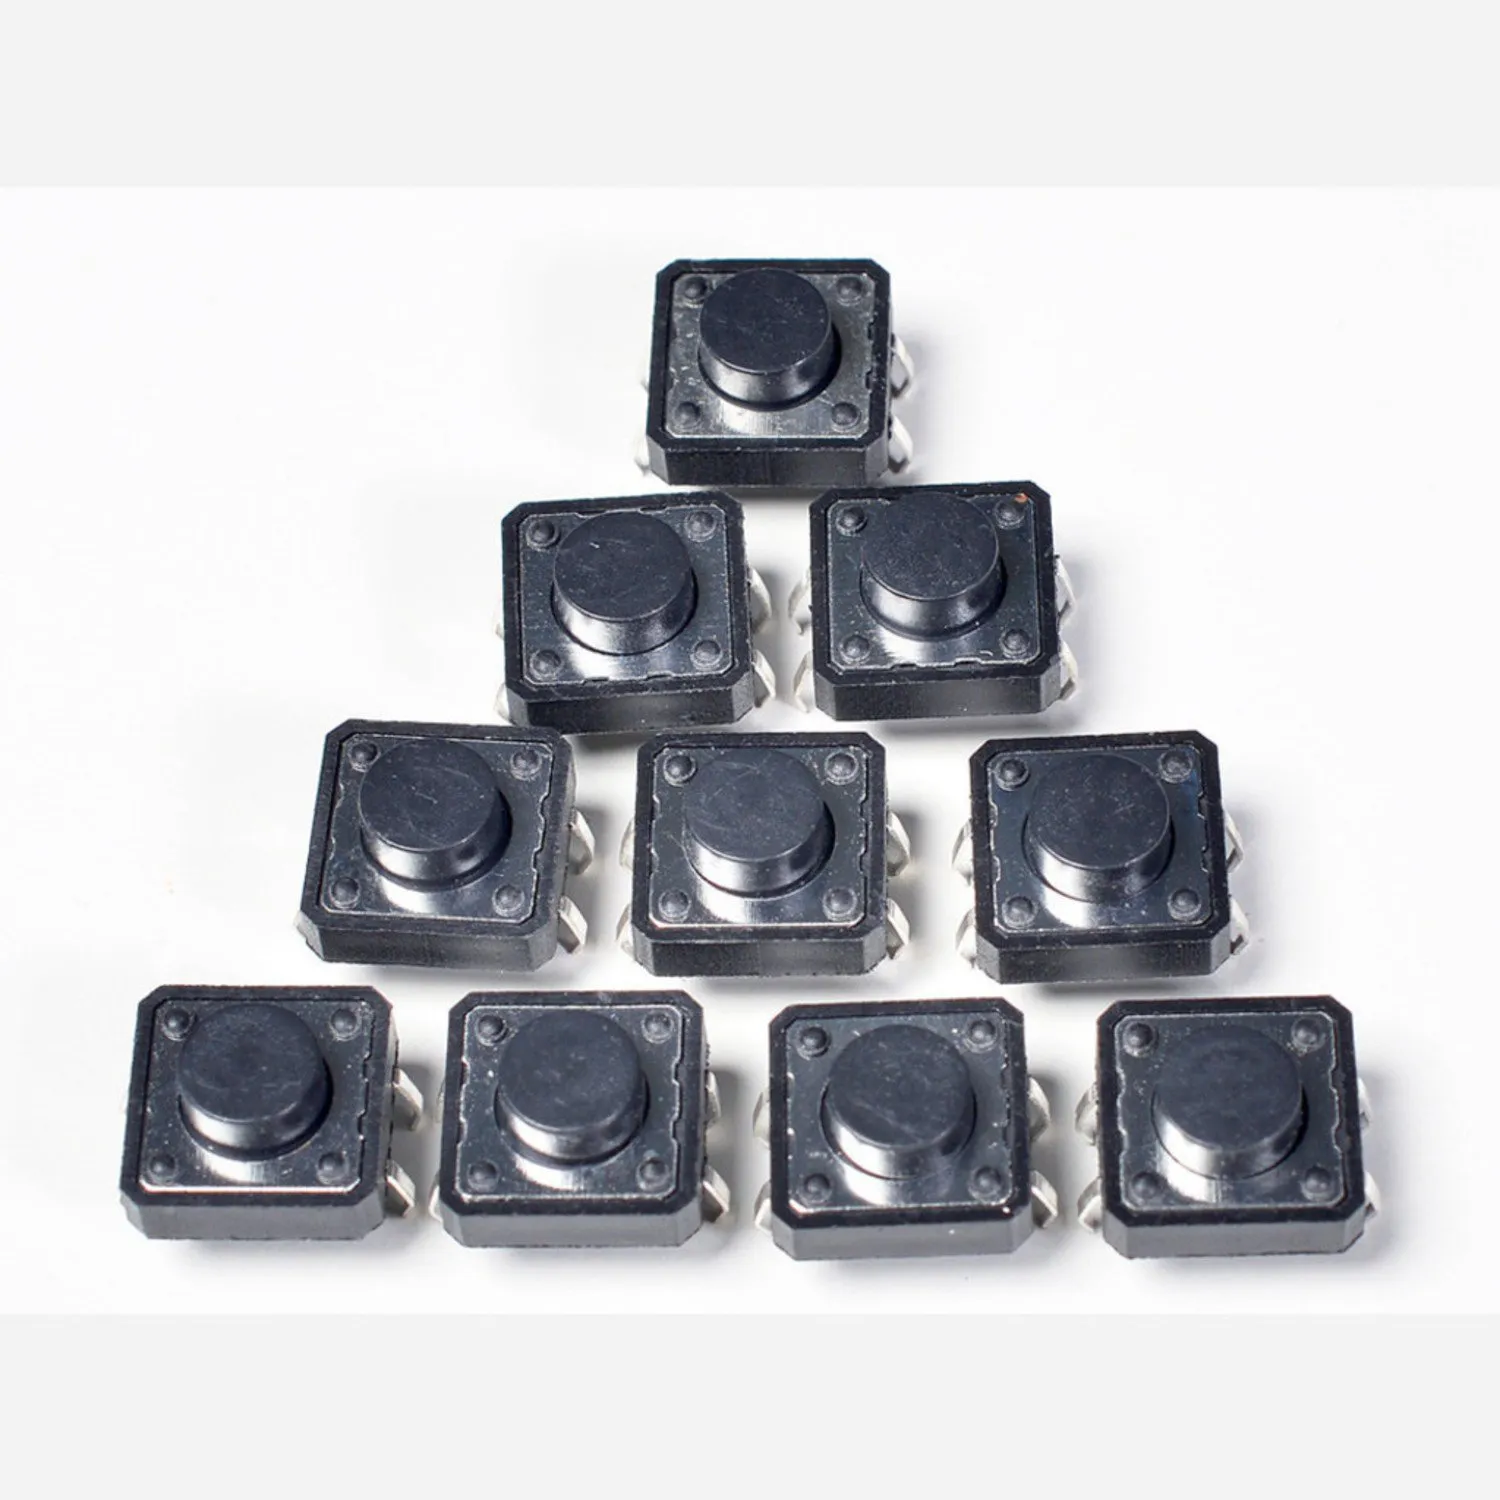 Photo of Tactile Switch Buttons (12mm square, 6mm tall) x 10 pack